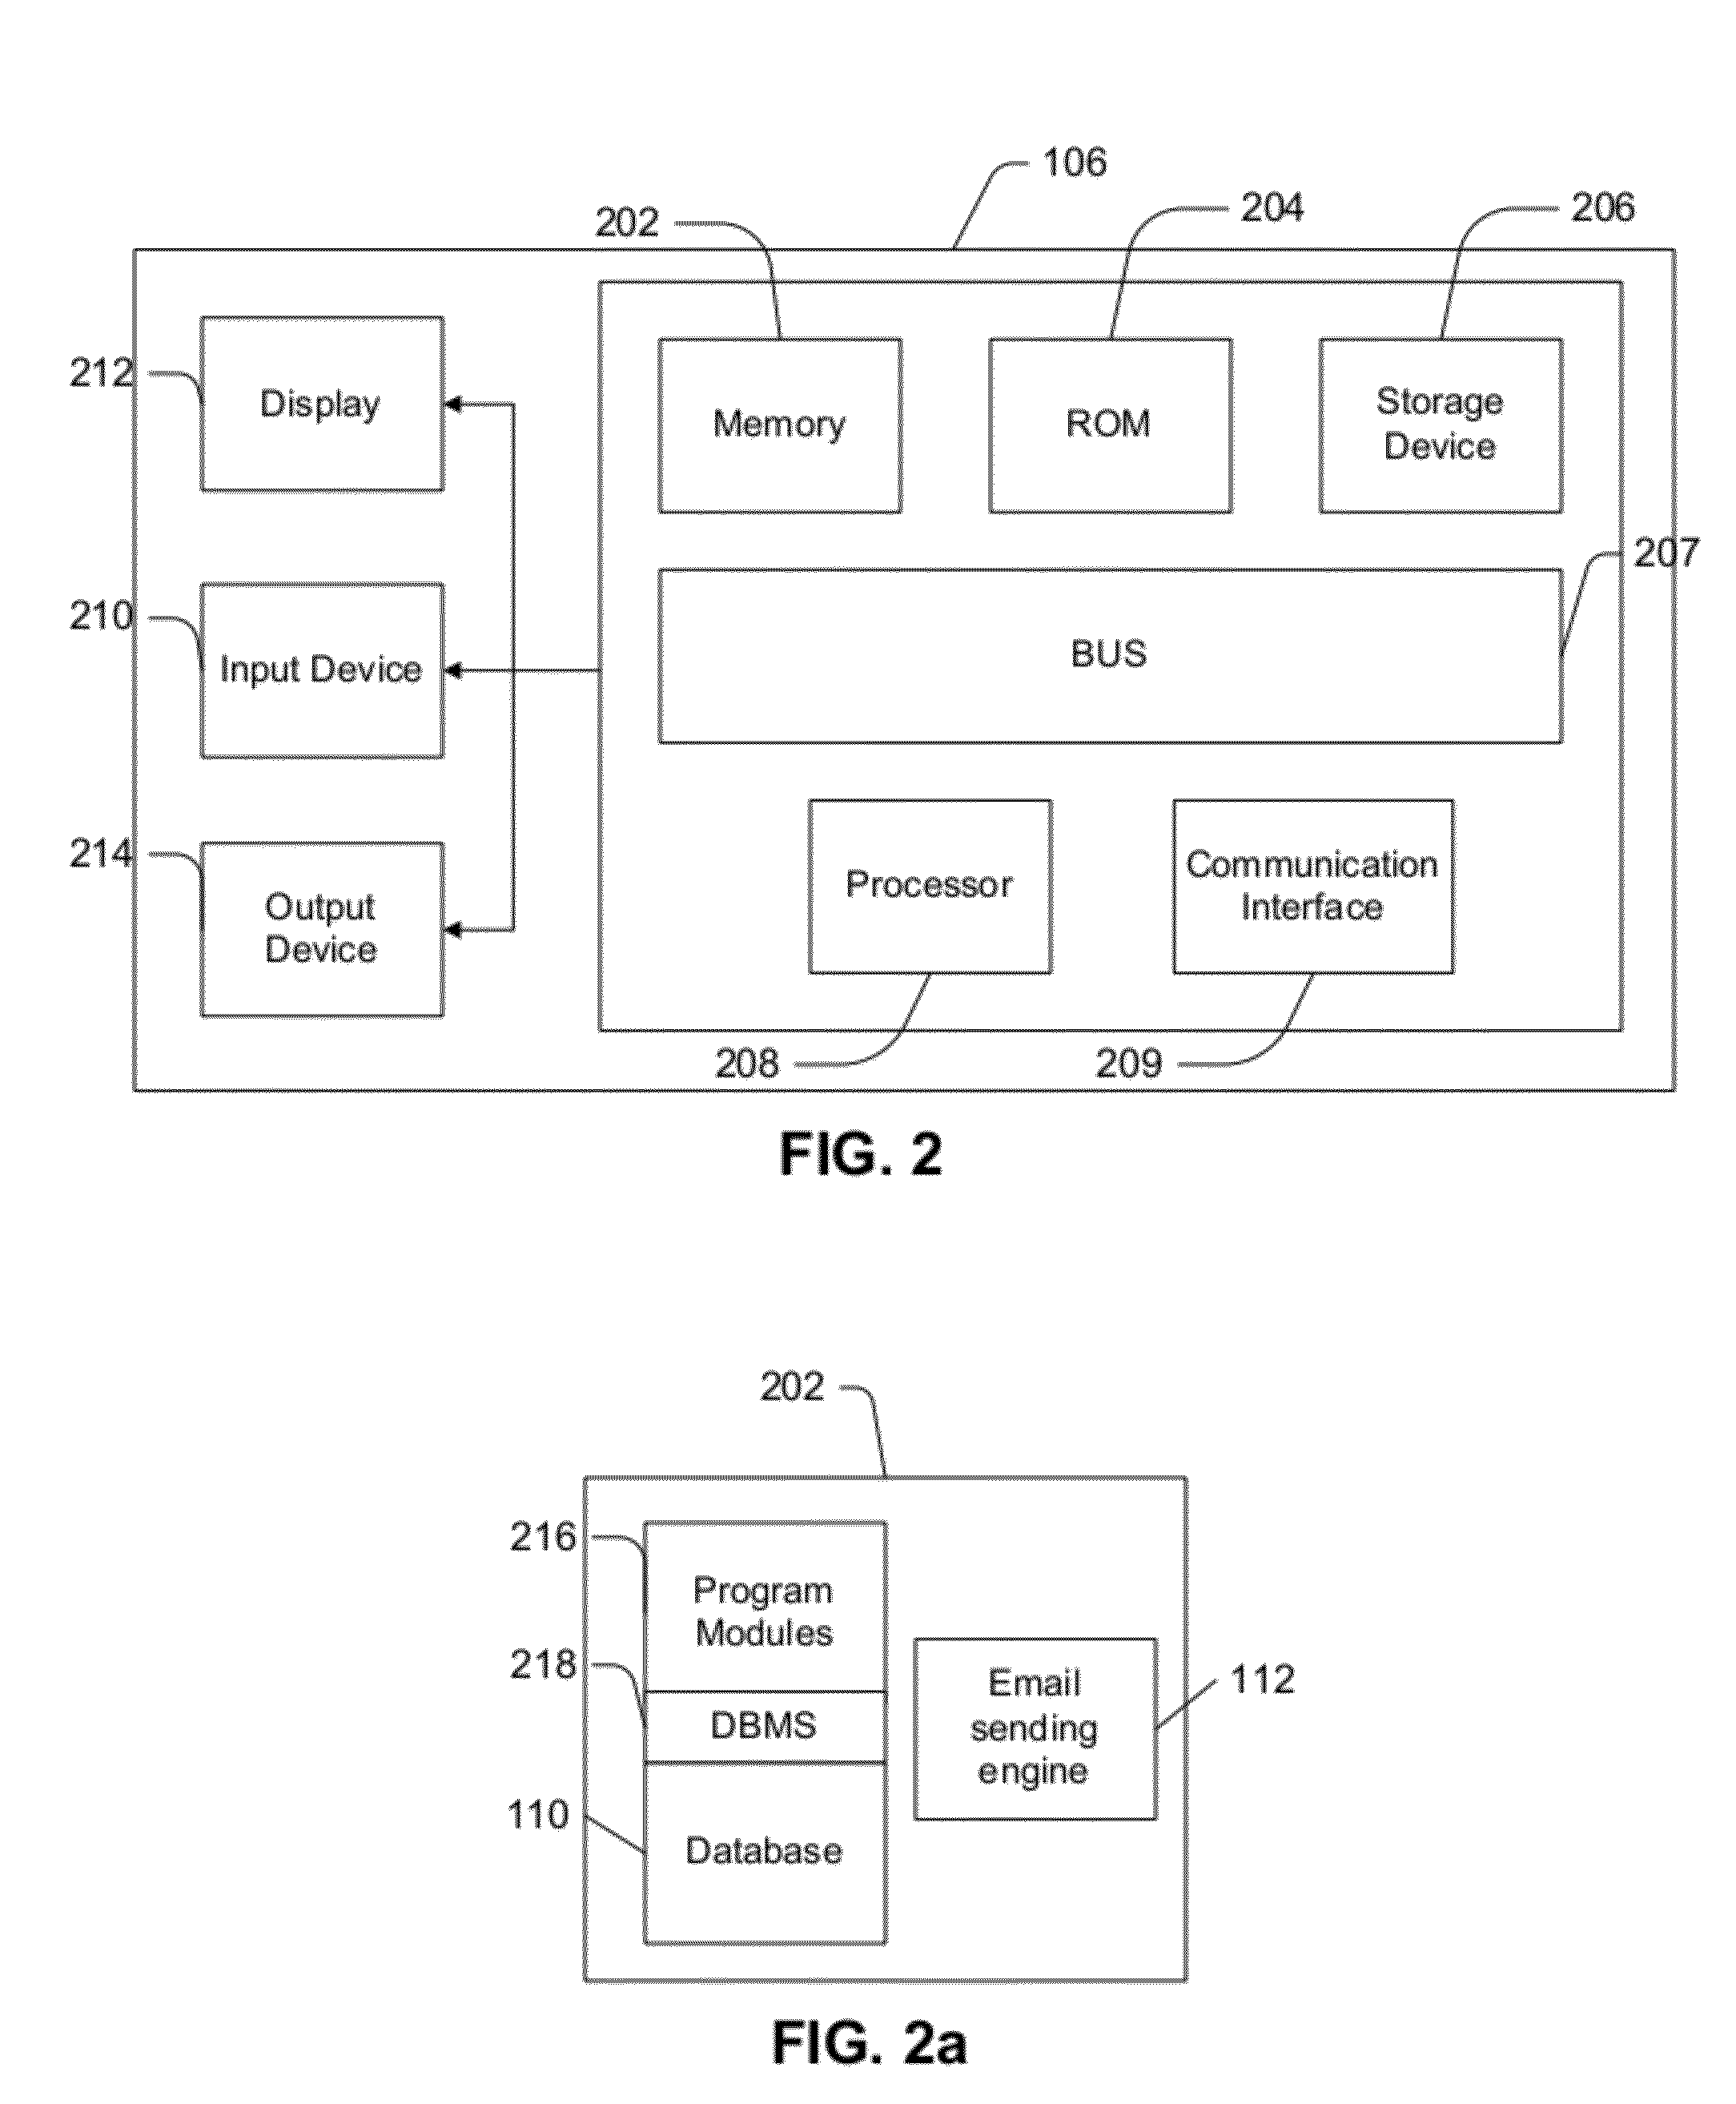 Email Strategy Templates System and Method